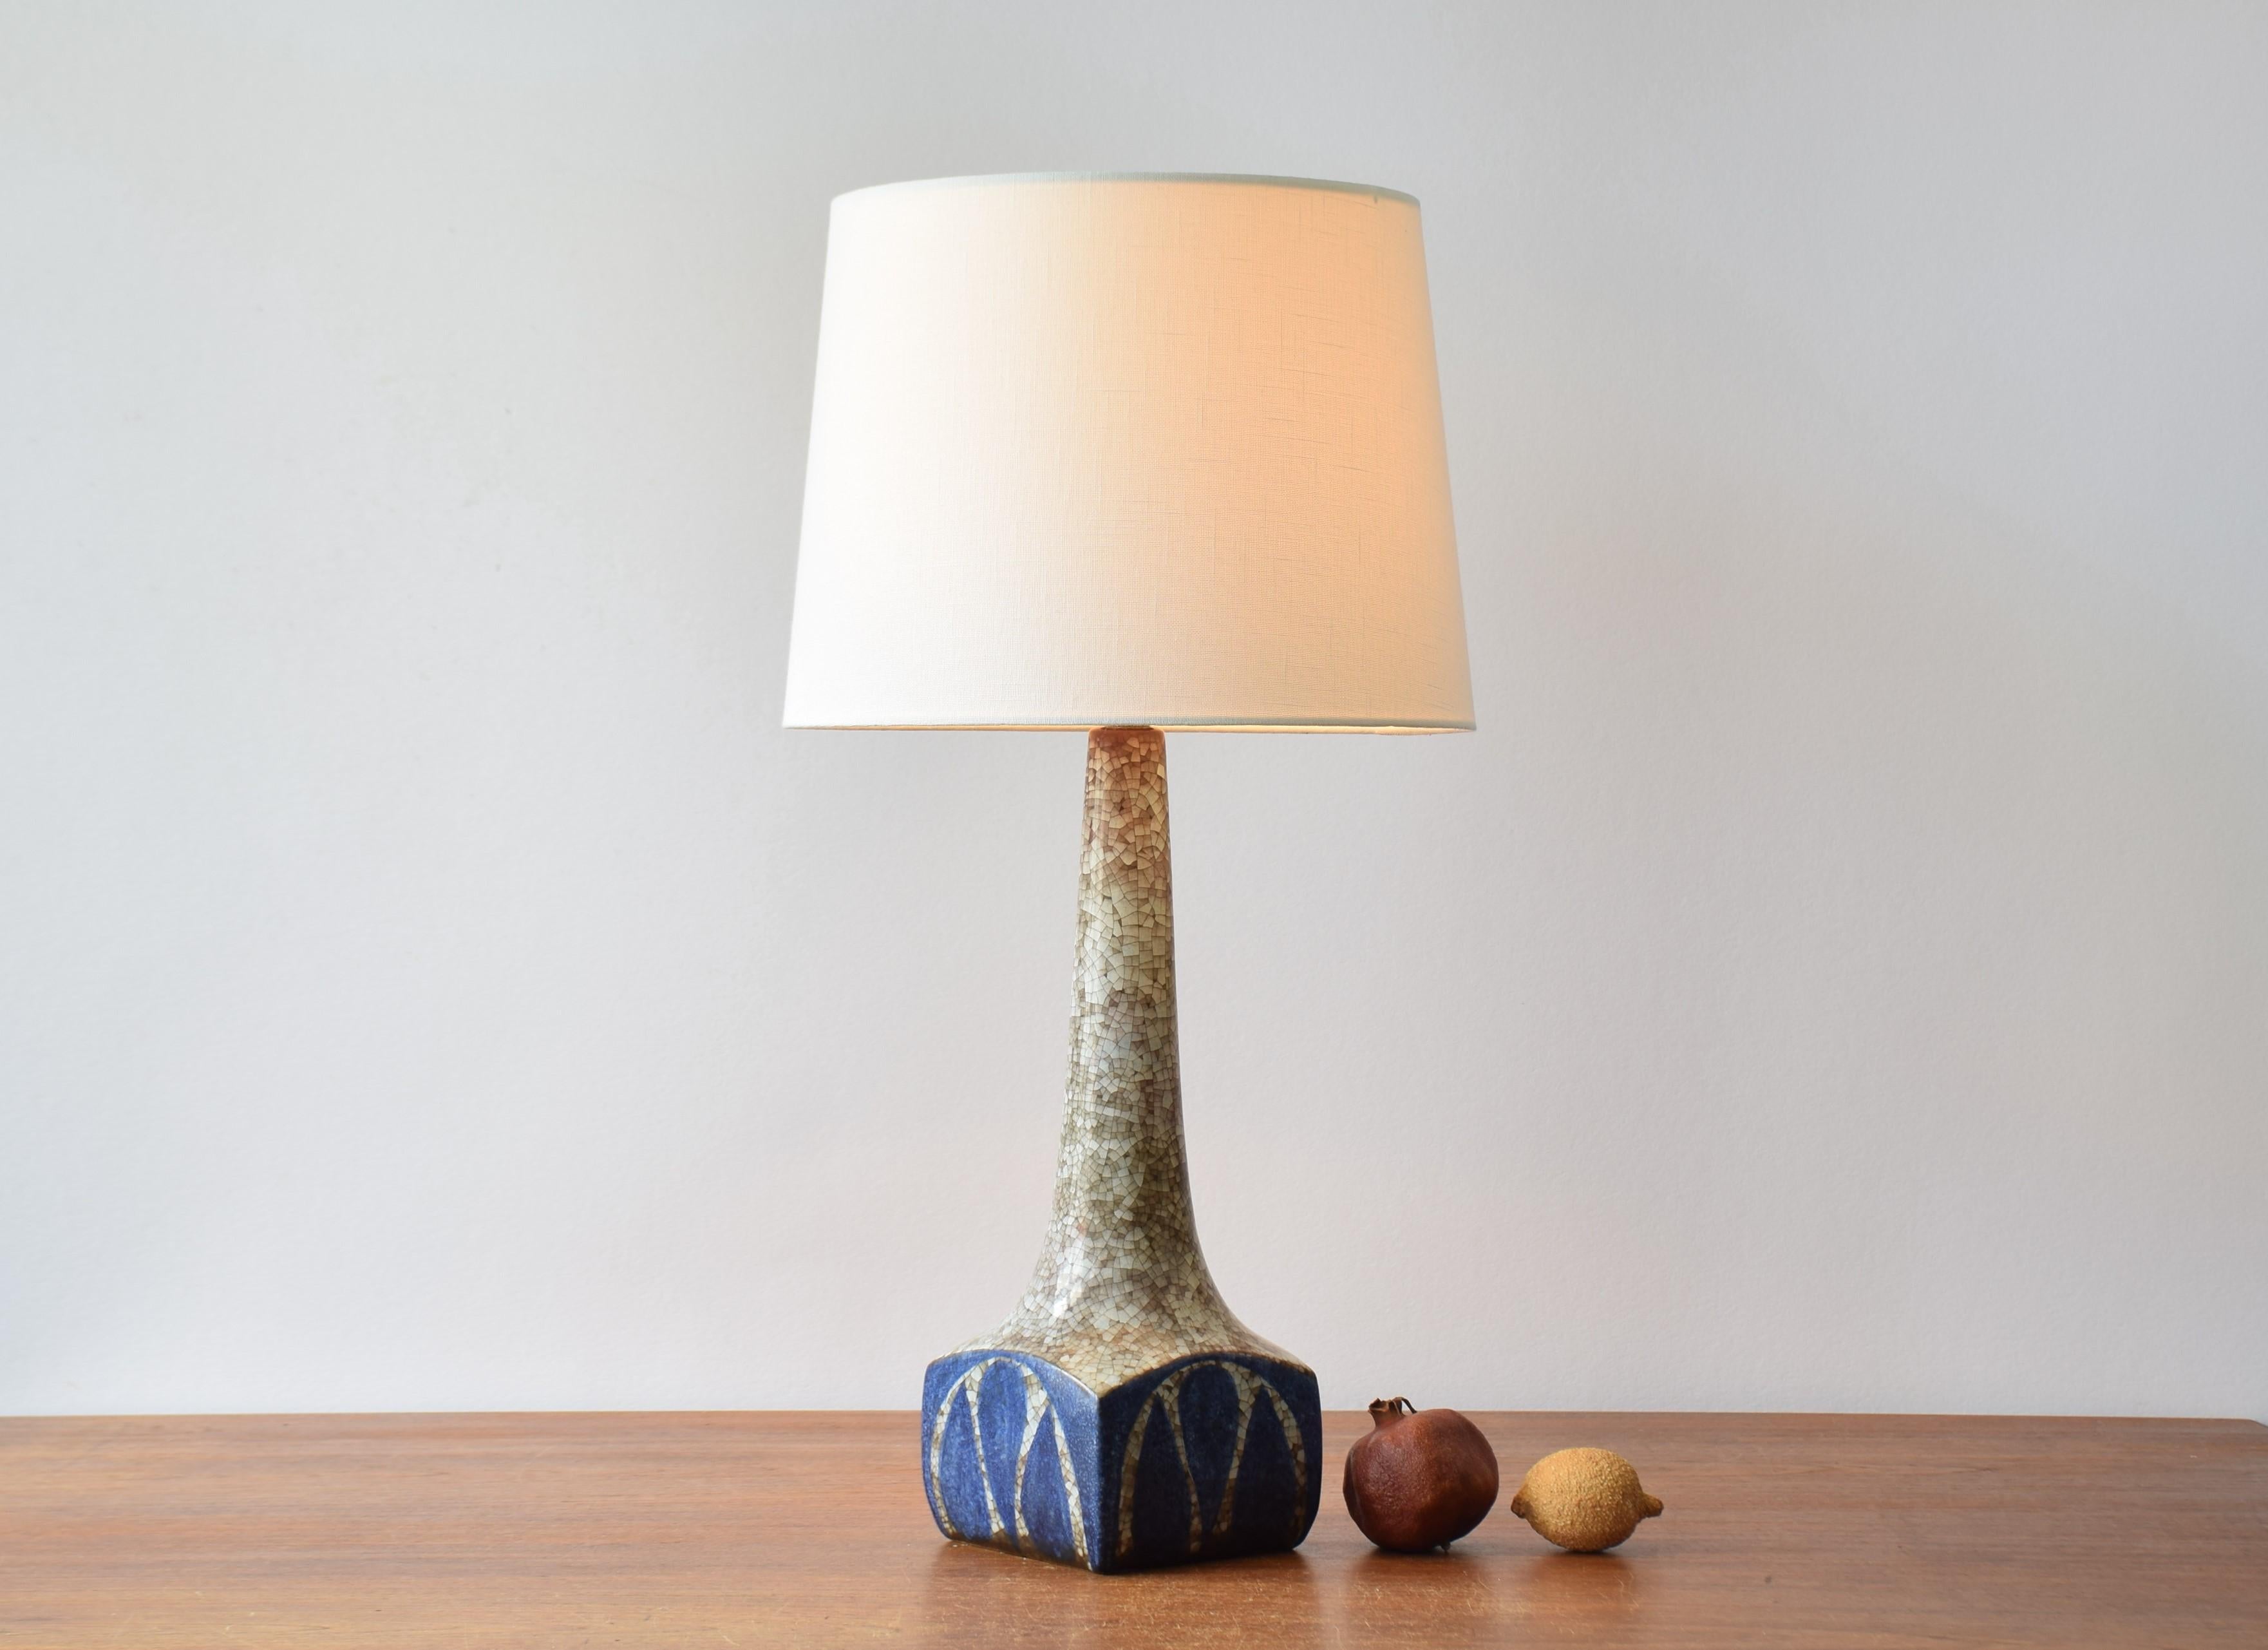 Tall ceramic table lamp designed by Marianne Starck for the Danish ceramic workshop Michael Andersen & Søn (MA&S) on the Danish island Bornholm. Made ca 1960s.

The lampbase shows a stylised leaf or flower decor in blue and gray. The glaze has a